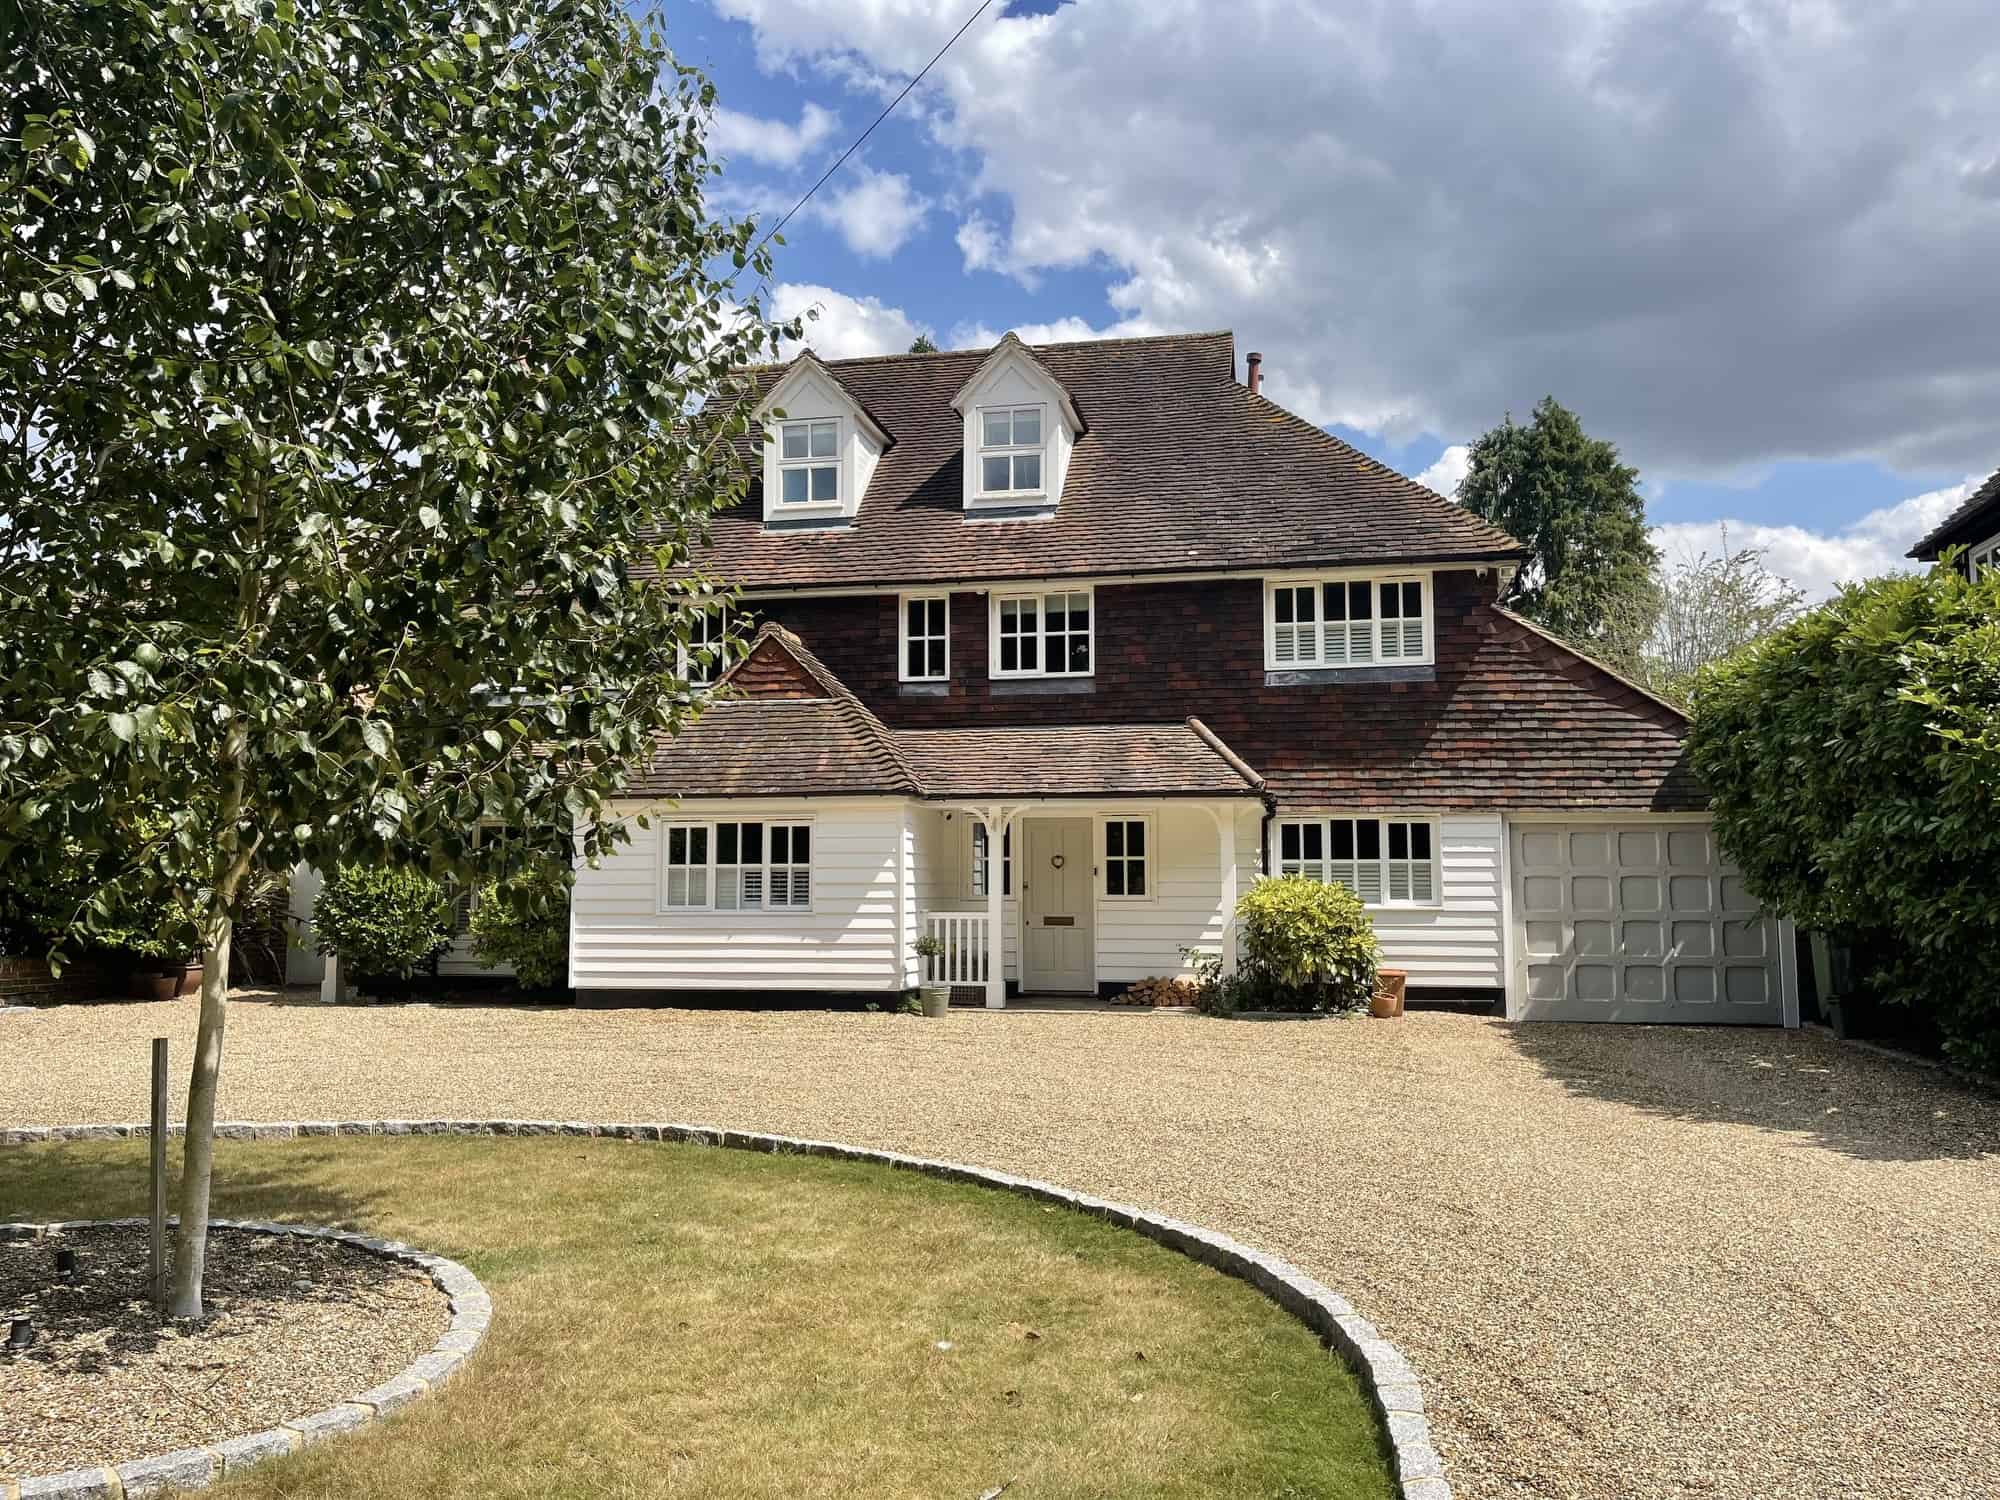 Coach House BR7 - A detached New England style home with large mature gardens and attractive weatherboard exterior - The Location Guys